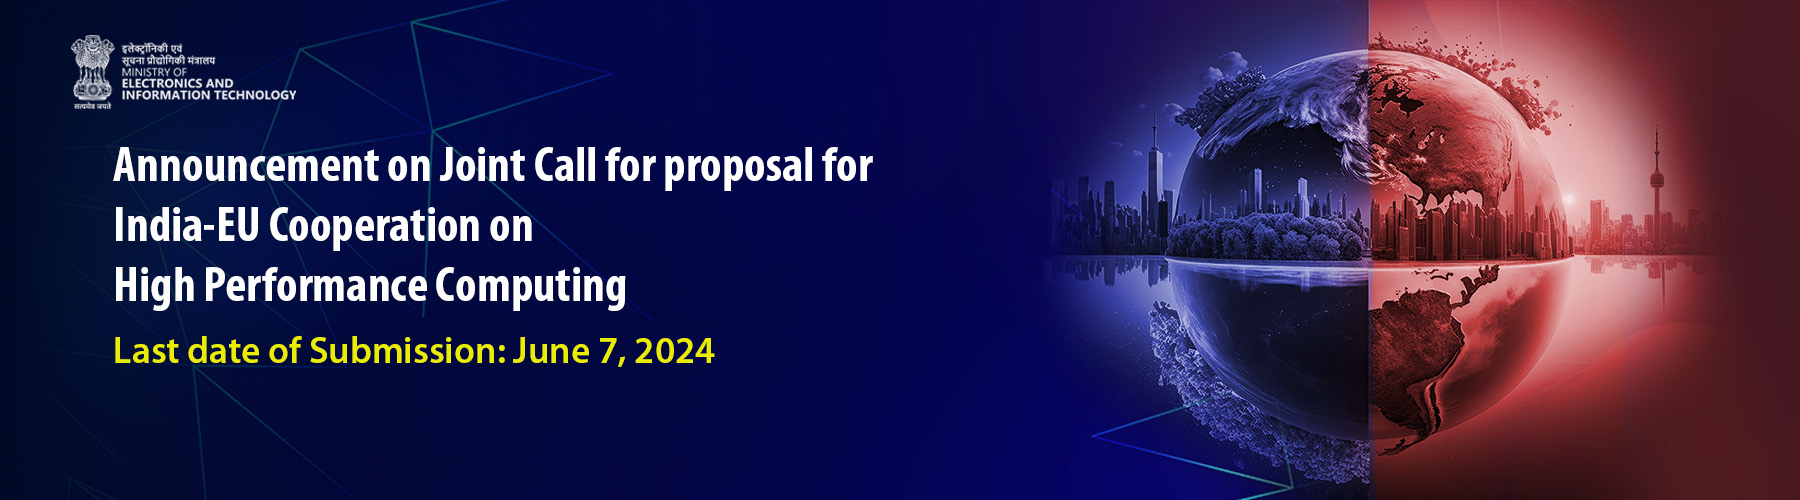 Announcement on Joint Call for proposal for India-EU Cooperation on  High Performance Computing